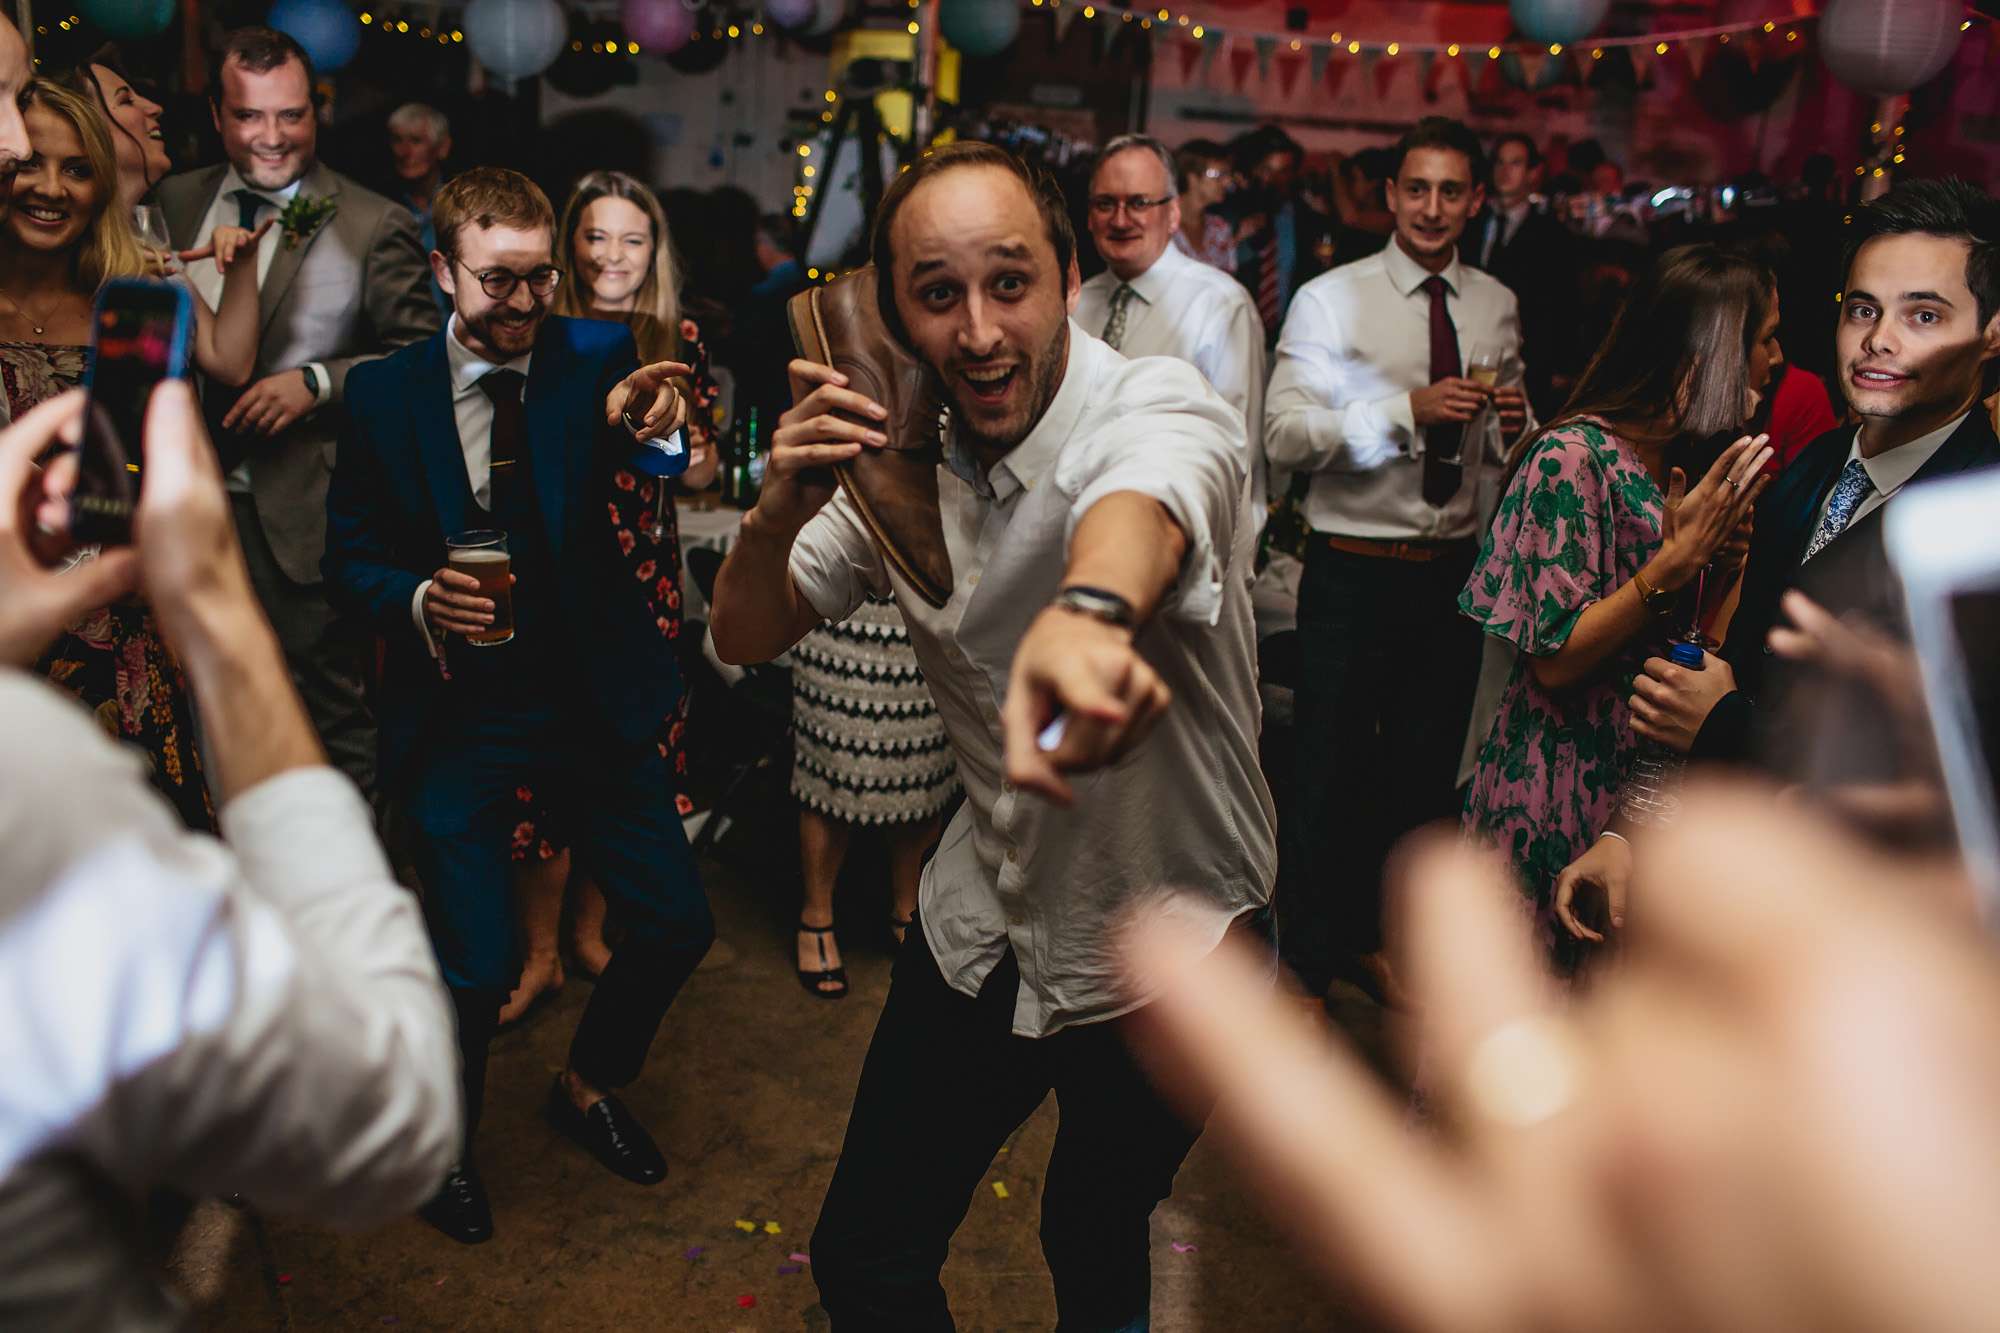 Wedding guest dancing with his shoe and it's funny